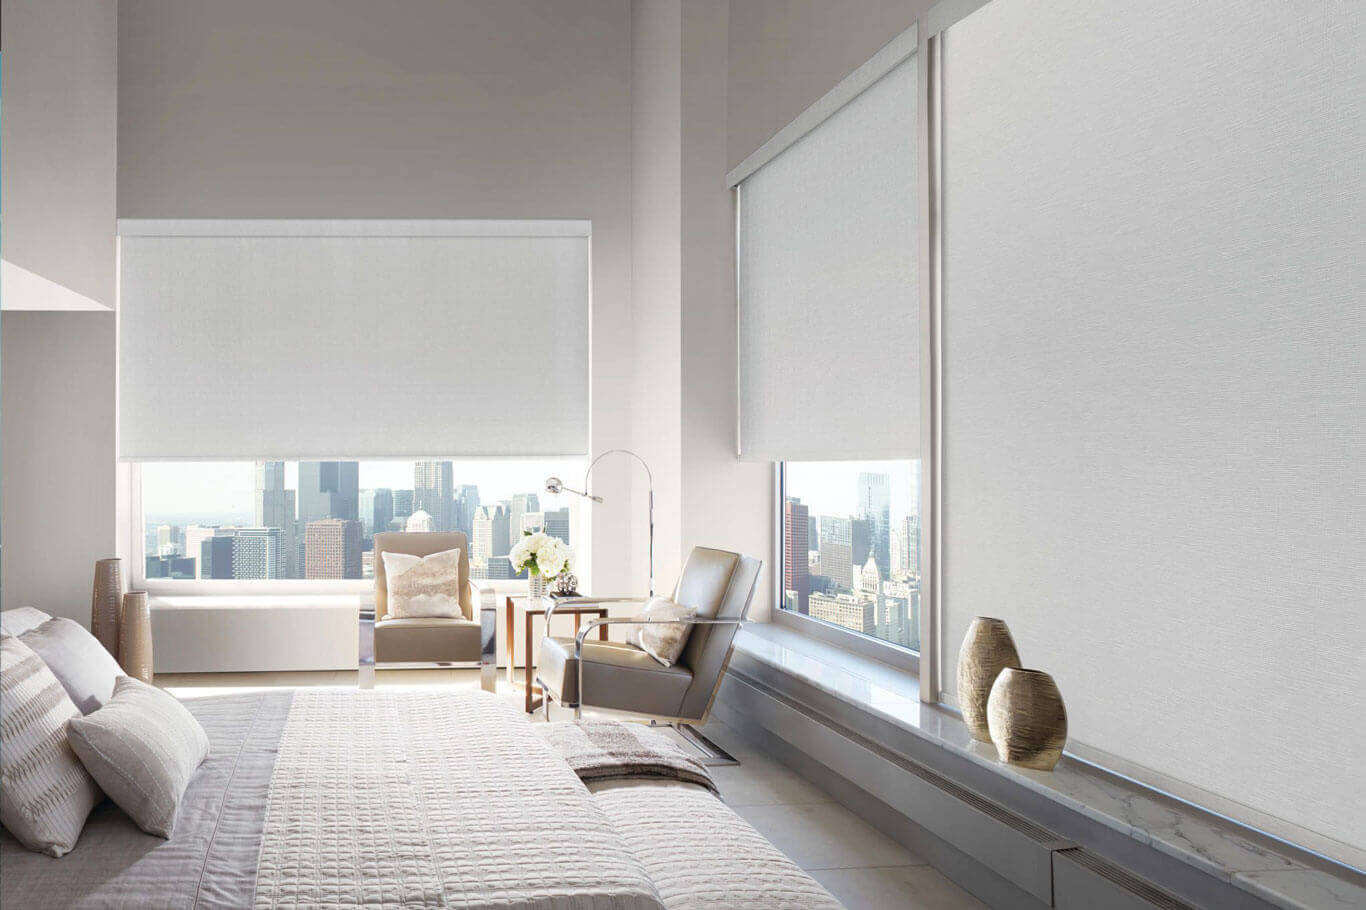 OR Why Roller Blinds are Widely Recommended?